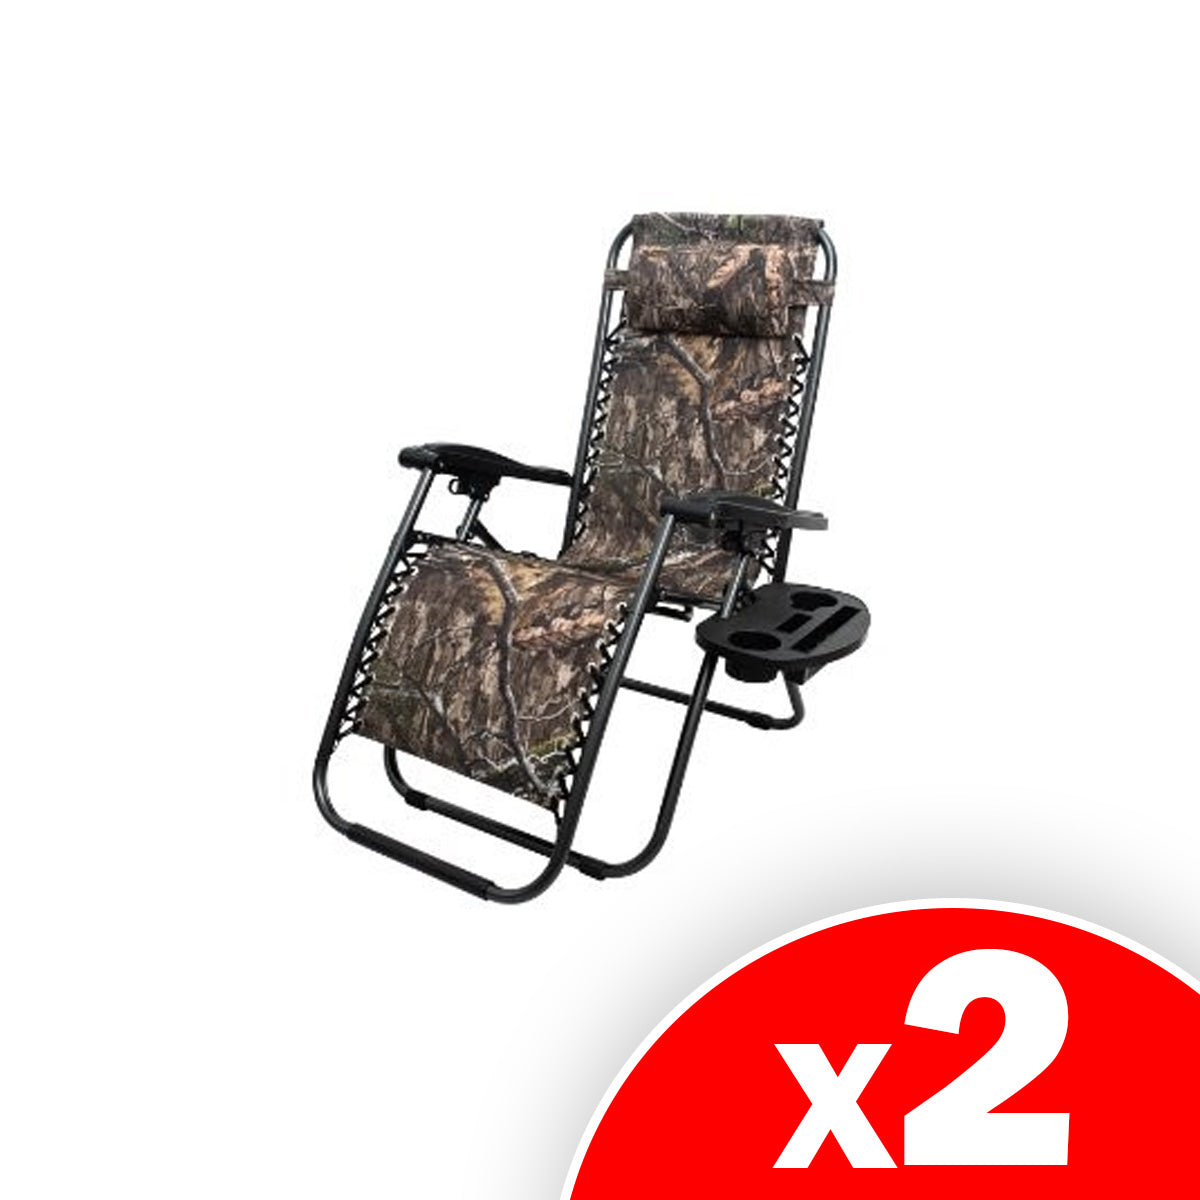 Trappers Peak Featuring Mossy Oak Camo Zero Gravity Chair, 2 Pack